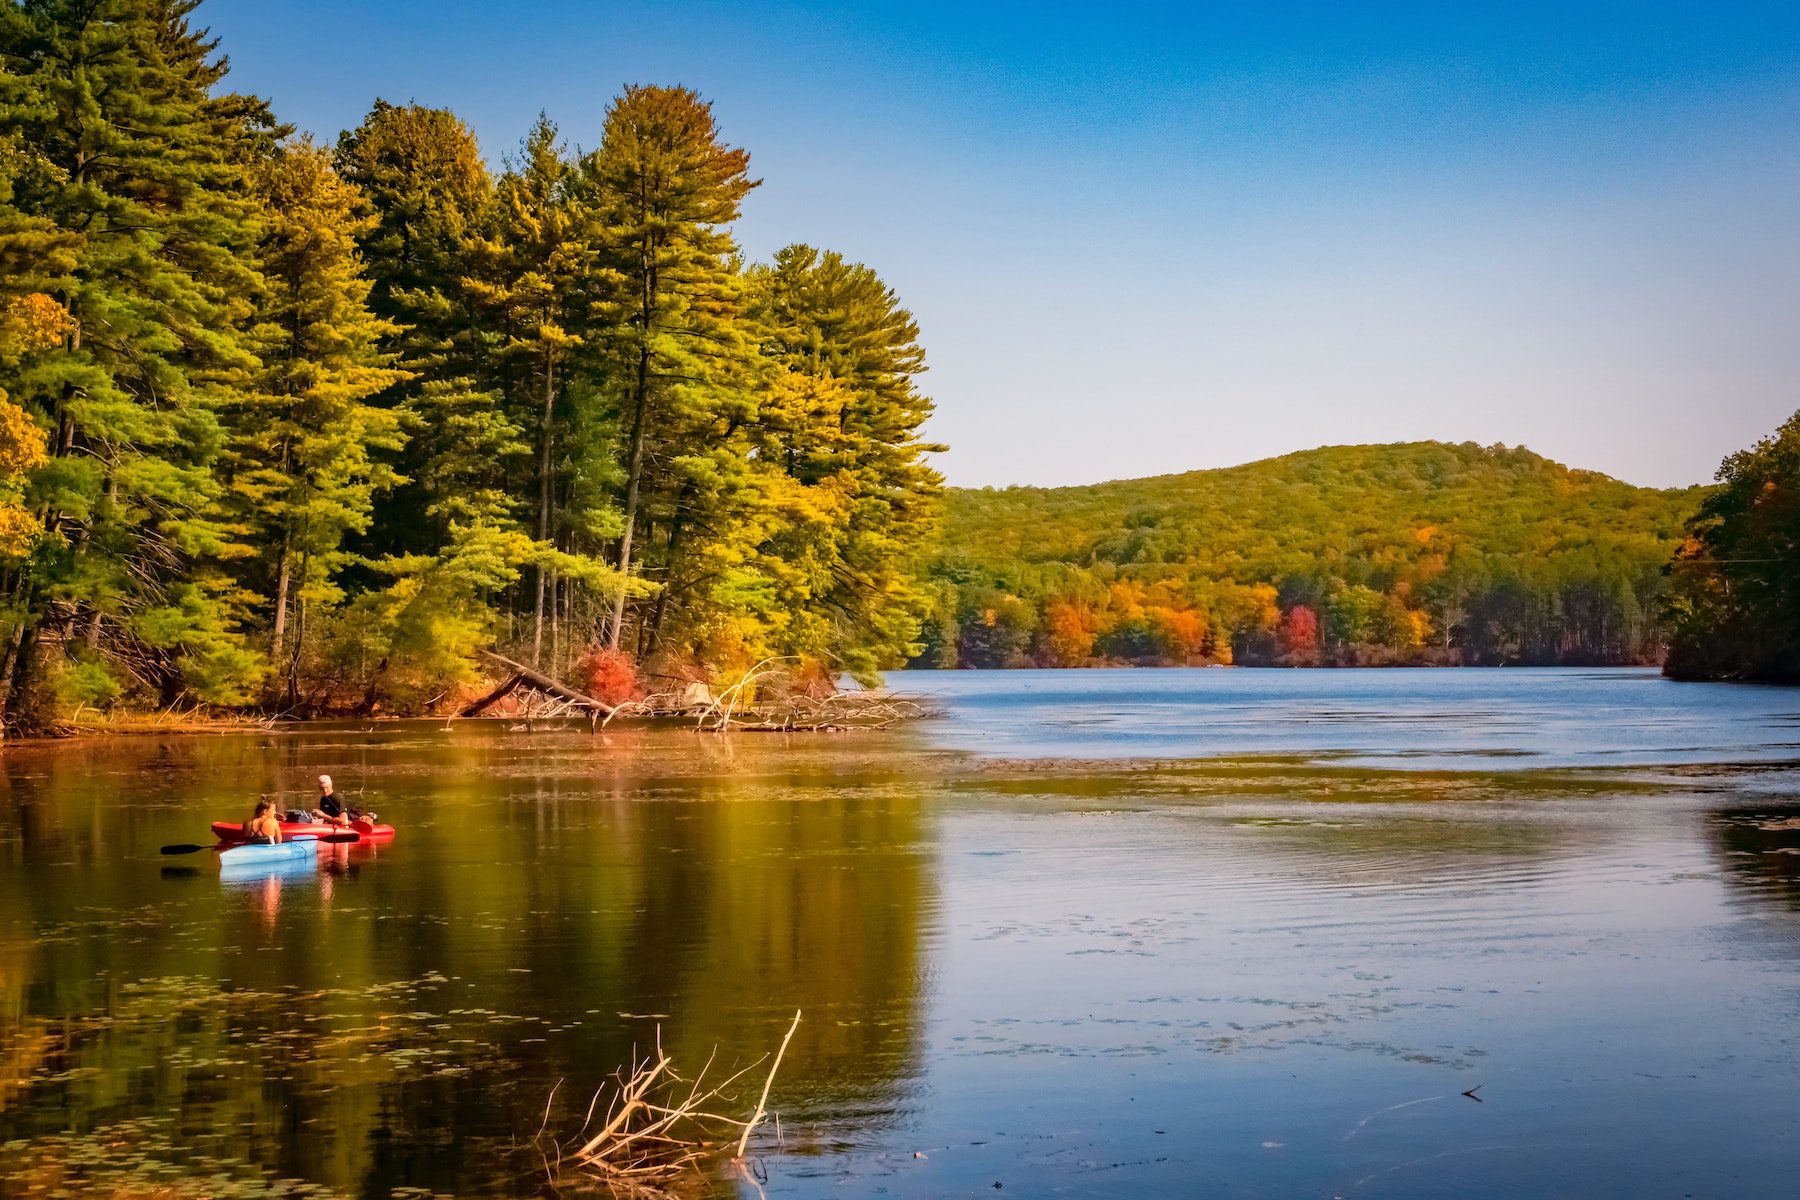 A couple kayaking in the lake of Harriman State Park while large trees cover the entire hillsides